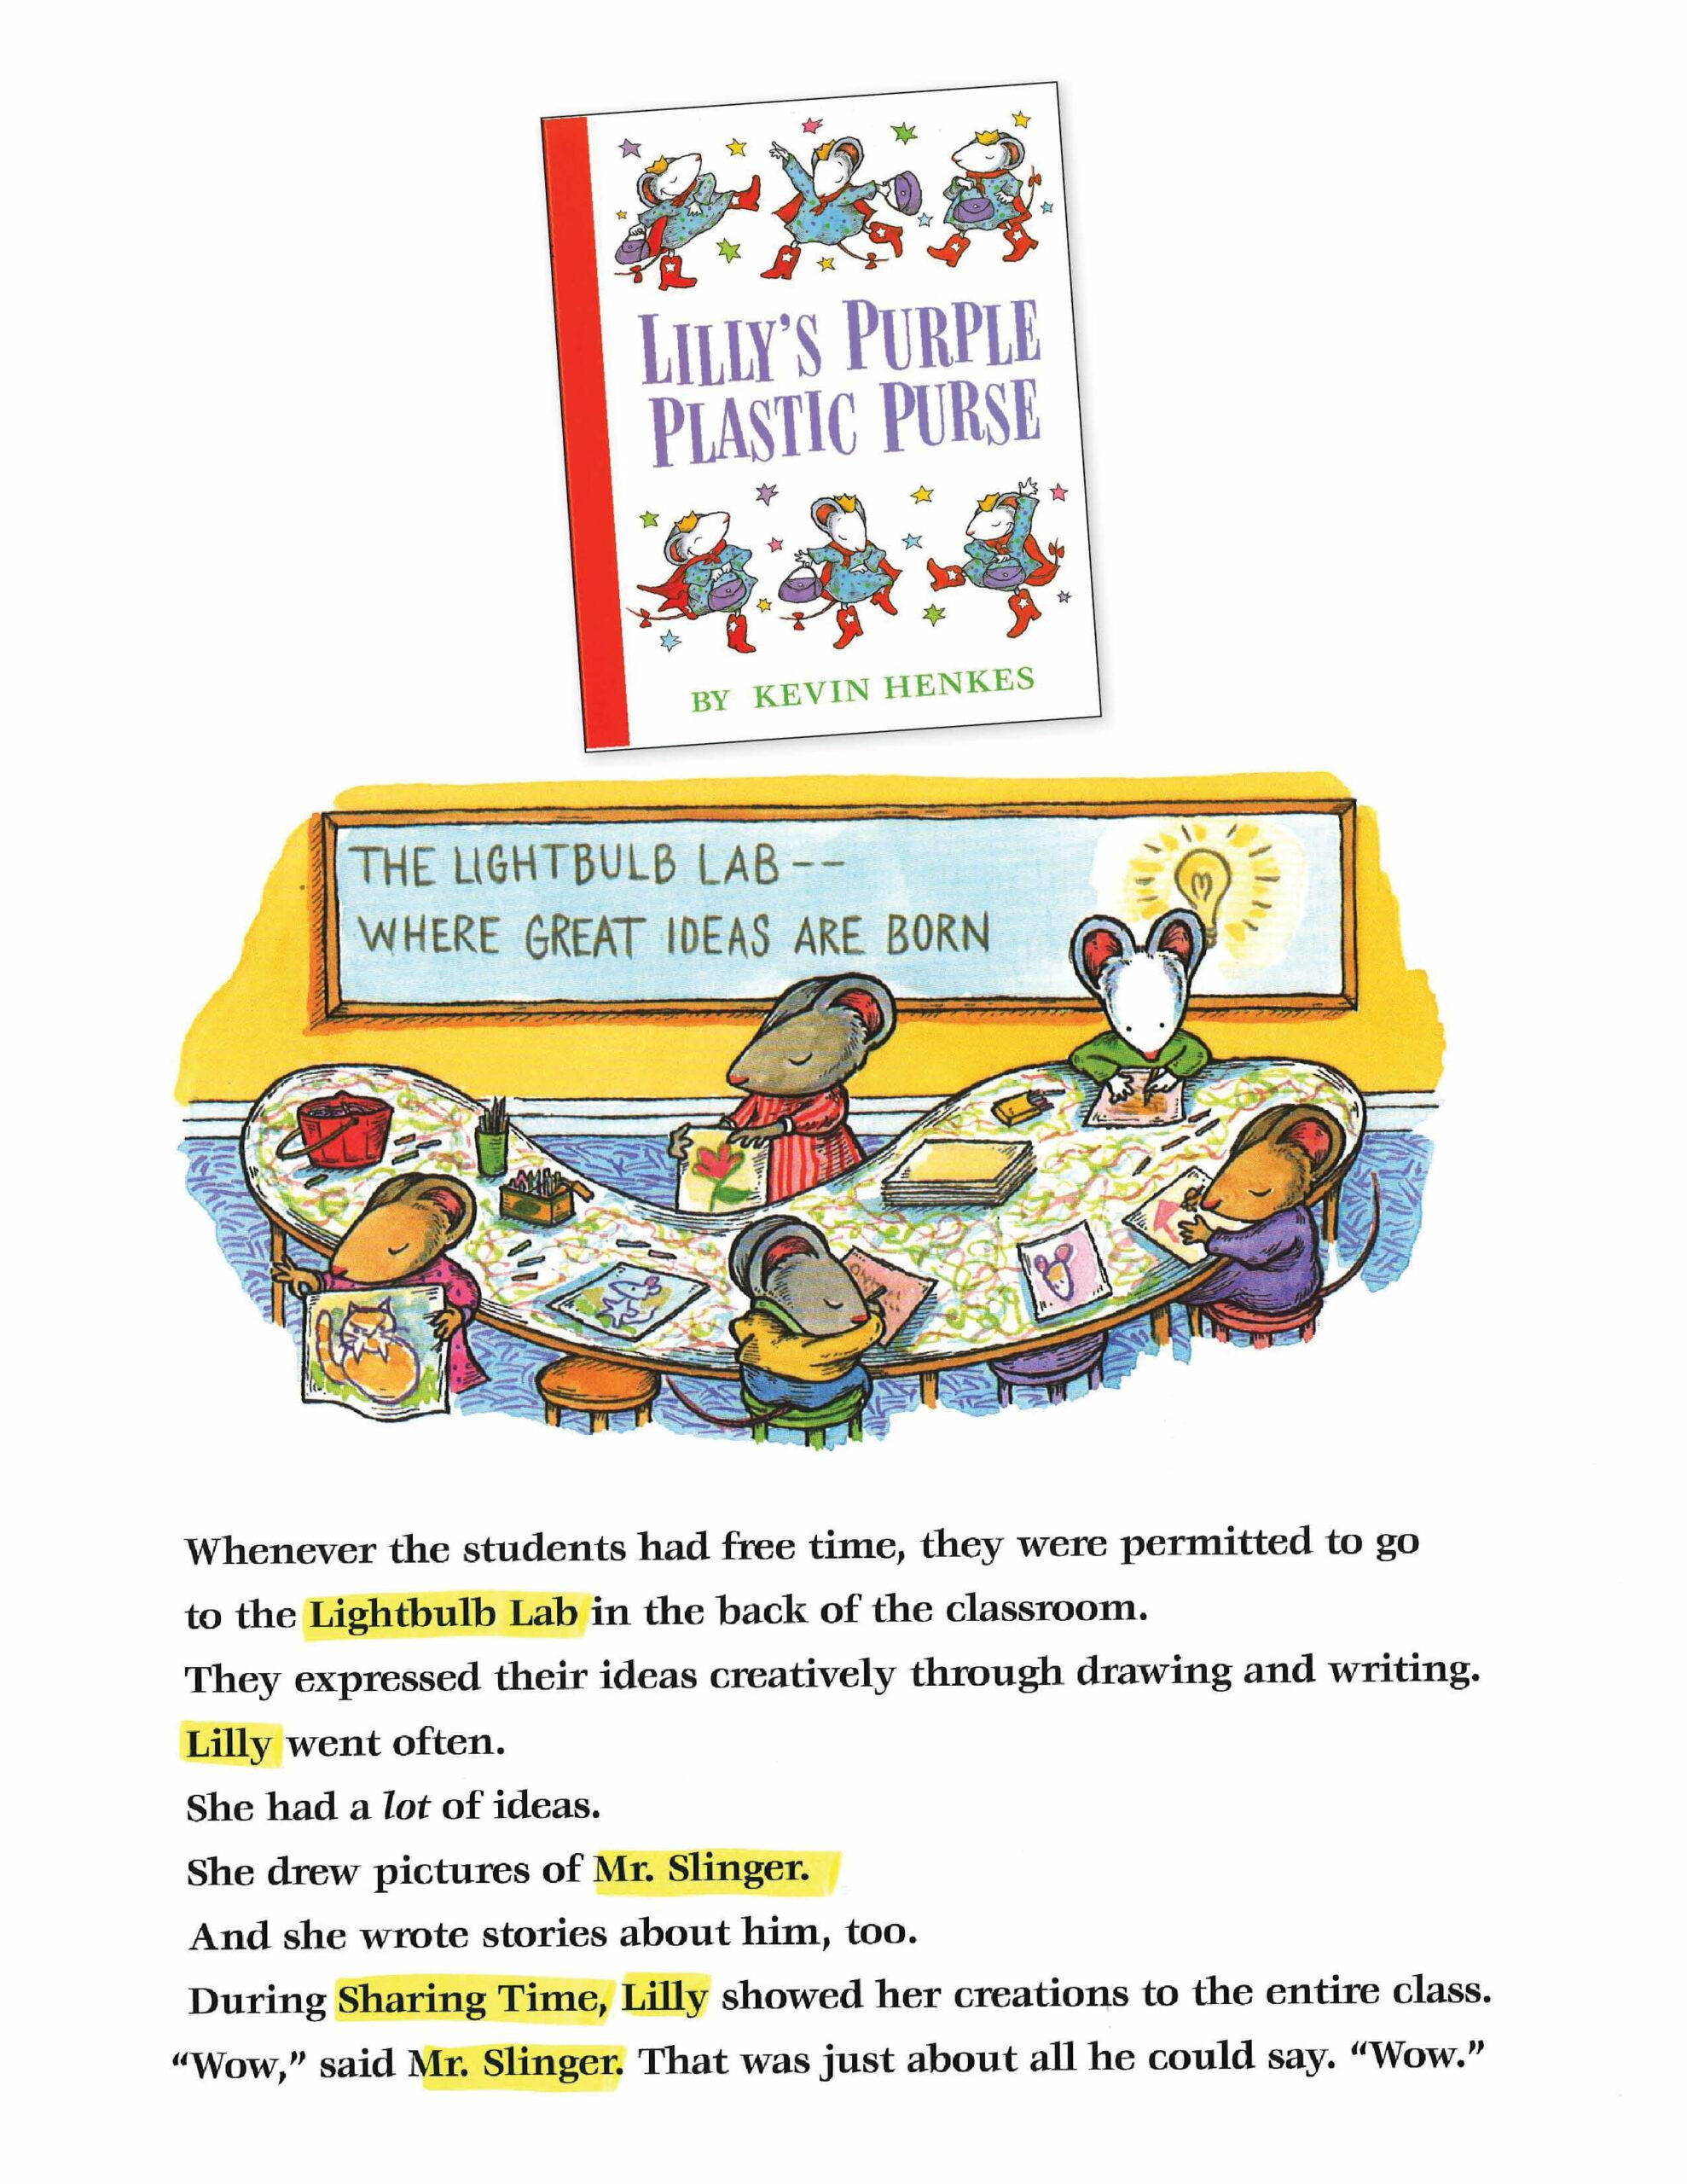 Integrate Mentor Text: Lilly's Purple Plastic Purse